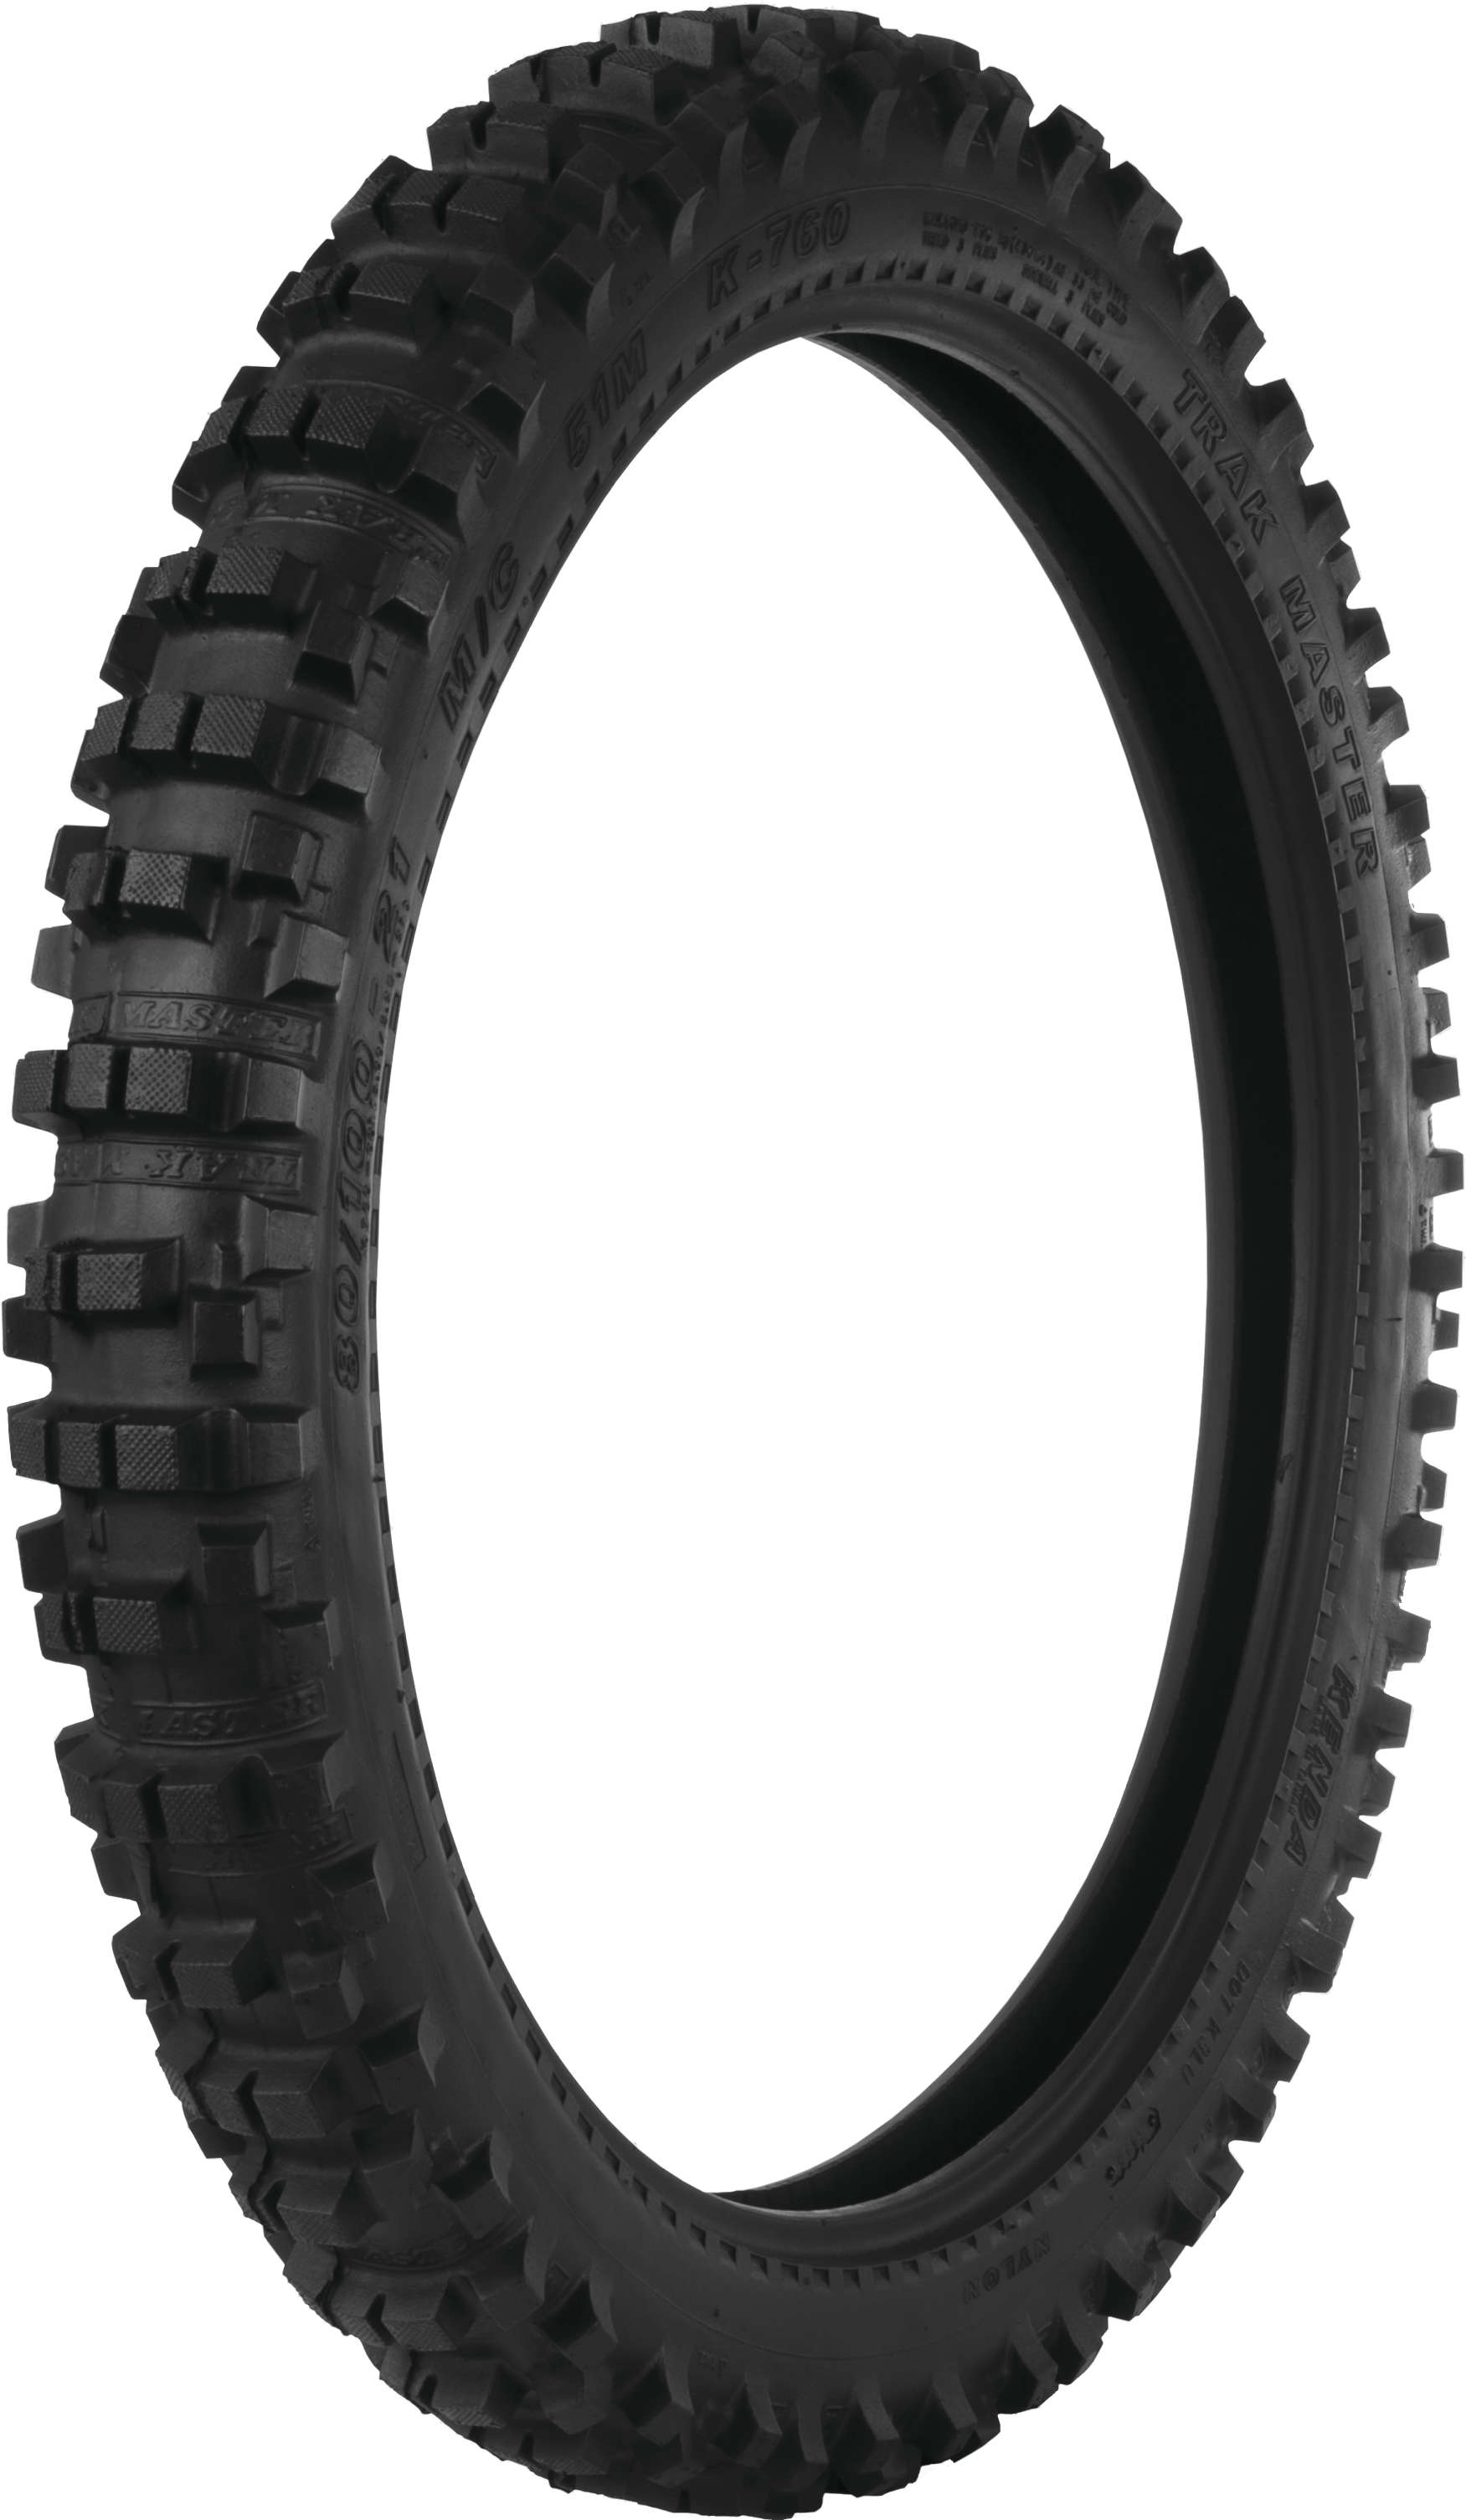 80/100-21 K760 Trakmaster II Front Dual Sport Tire - Click Image to Close